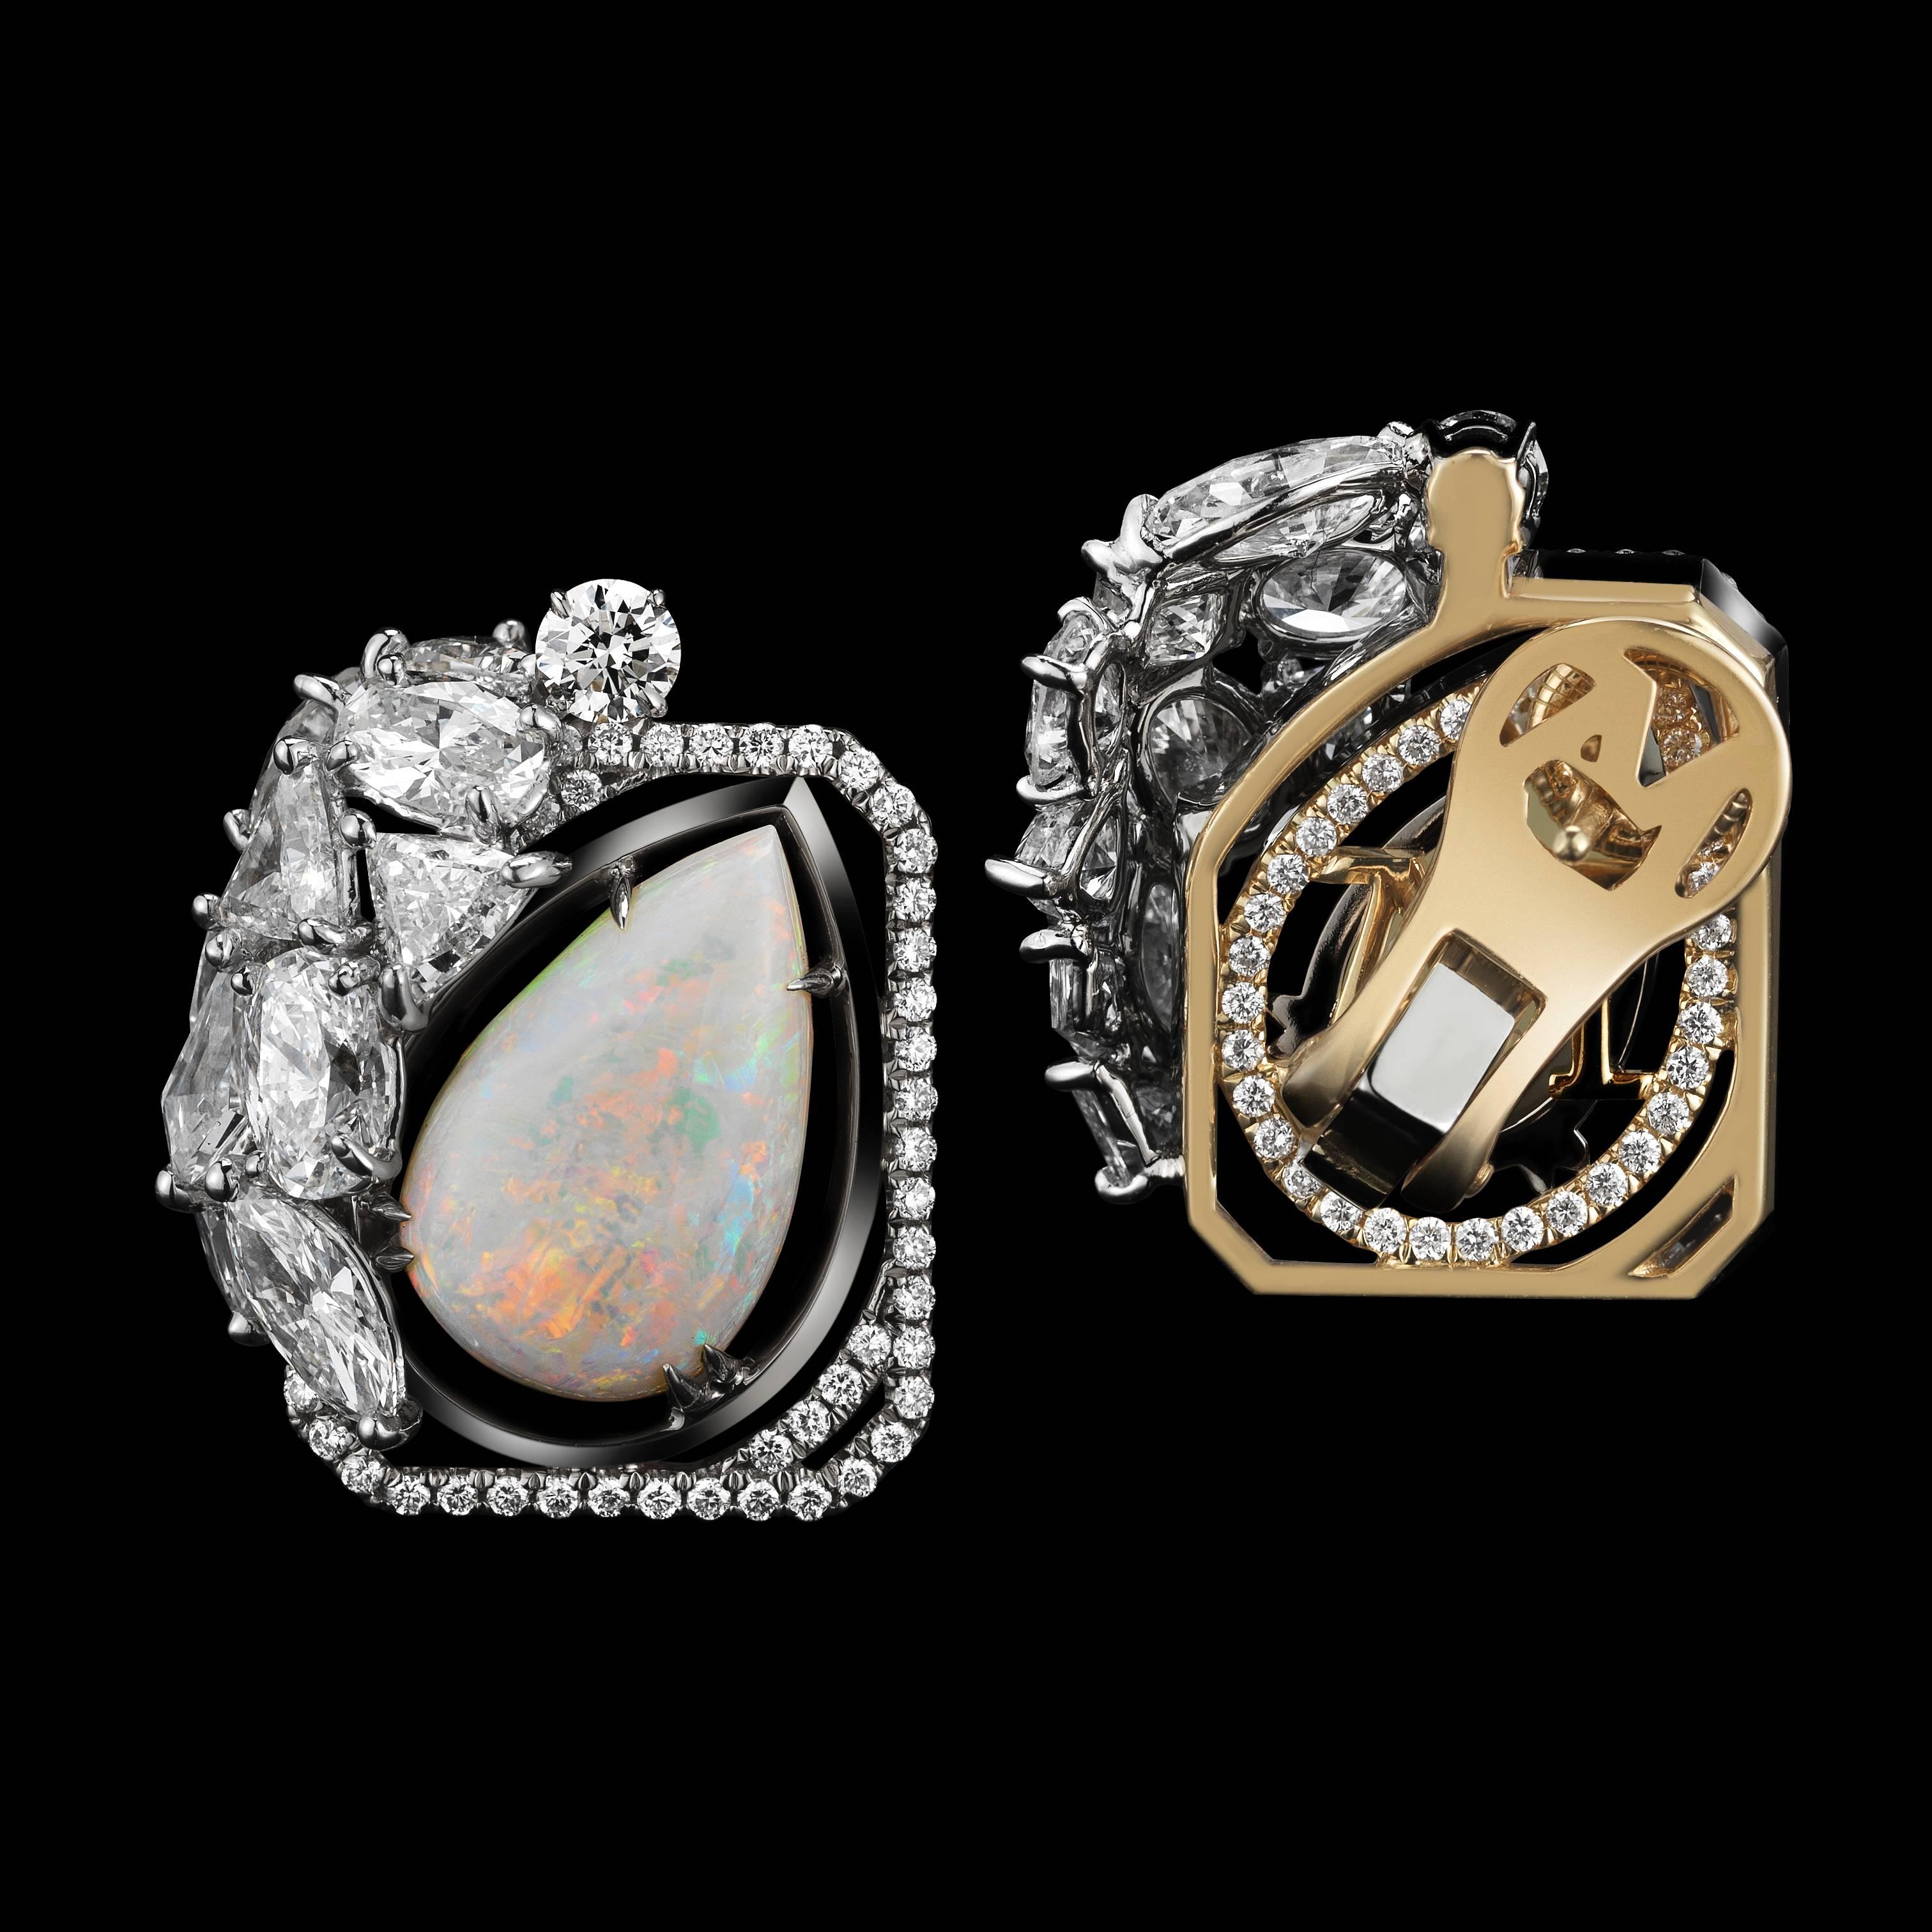 A pair of pear-shape Opal earrings featuring Round, Marquise, Trilliant, and Oval-shape Diamonds detailed with Alexandra Mor's signature floating Diamond melee and knife-edged wire. Earrings are set in 18 karat white gold on 18 karat yellow gold